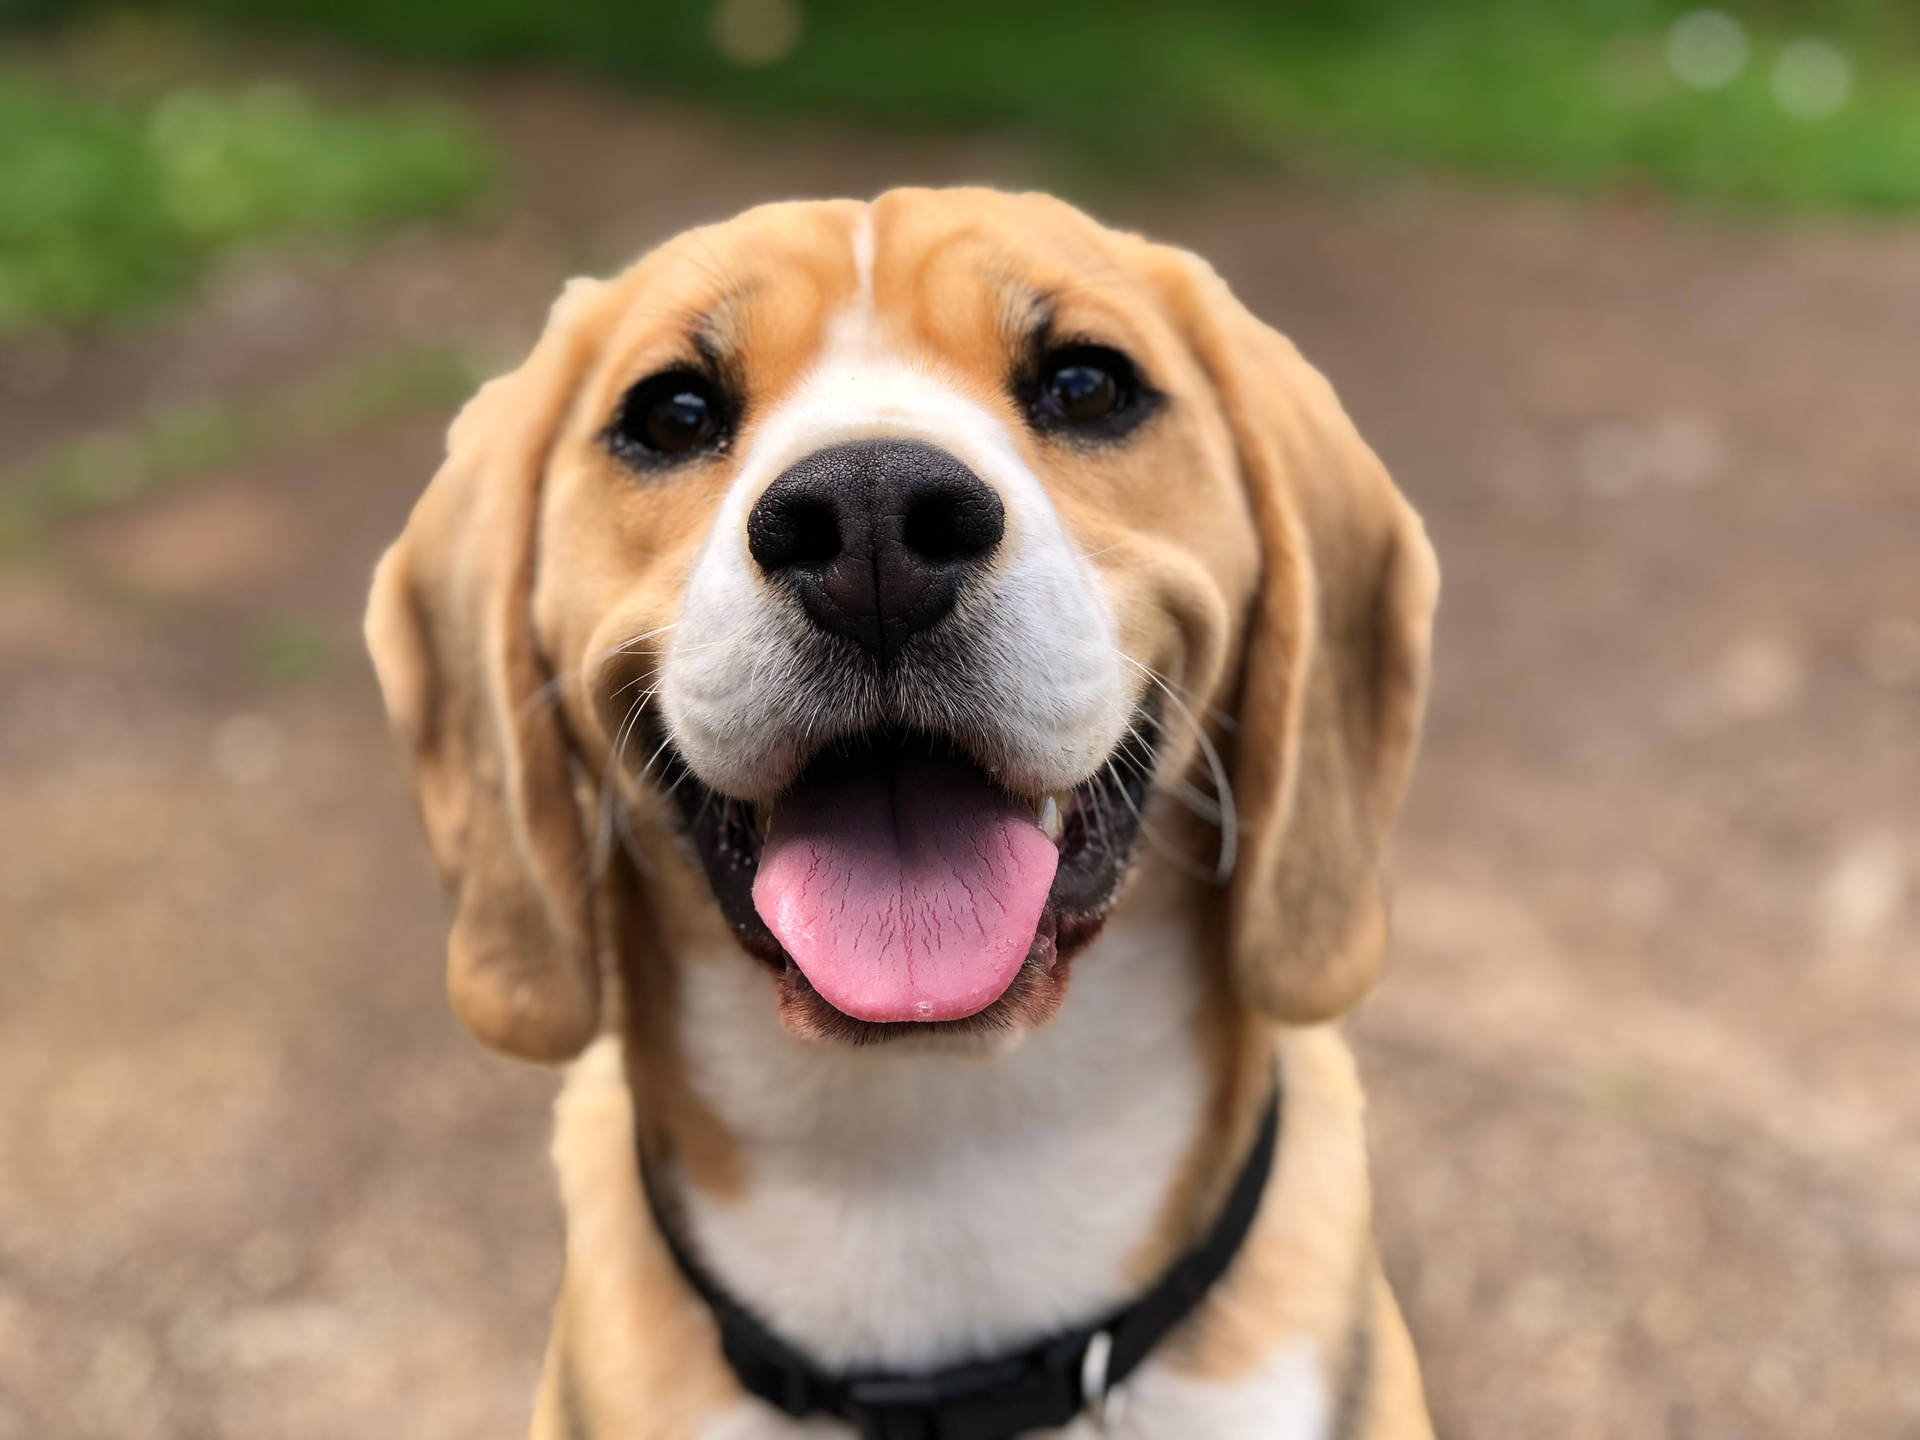 Adorable Beagle Dog with Soft Furry Face Wallpaper